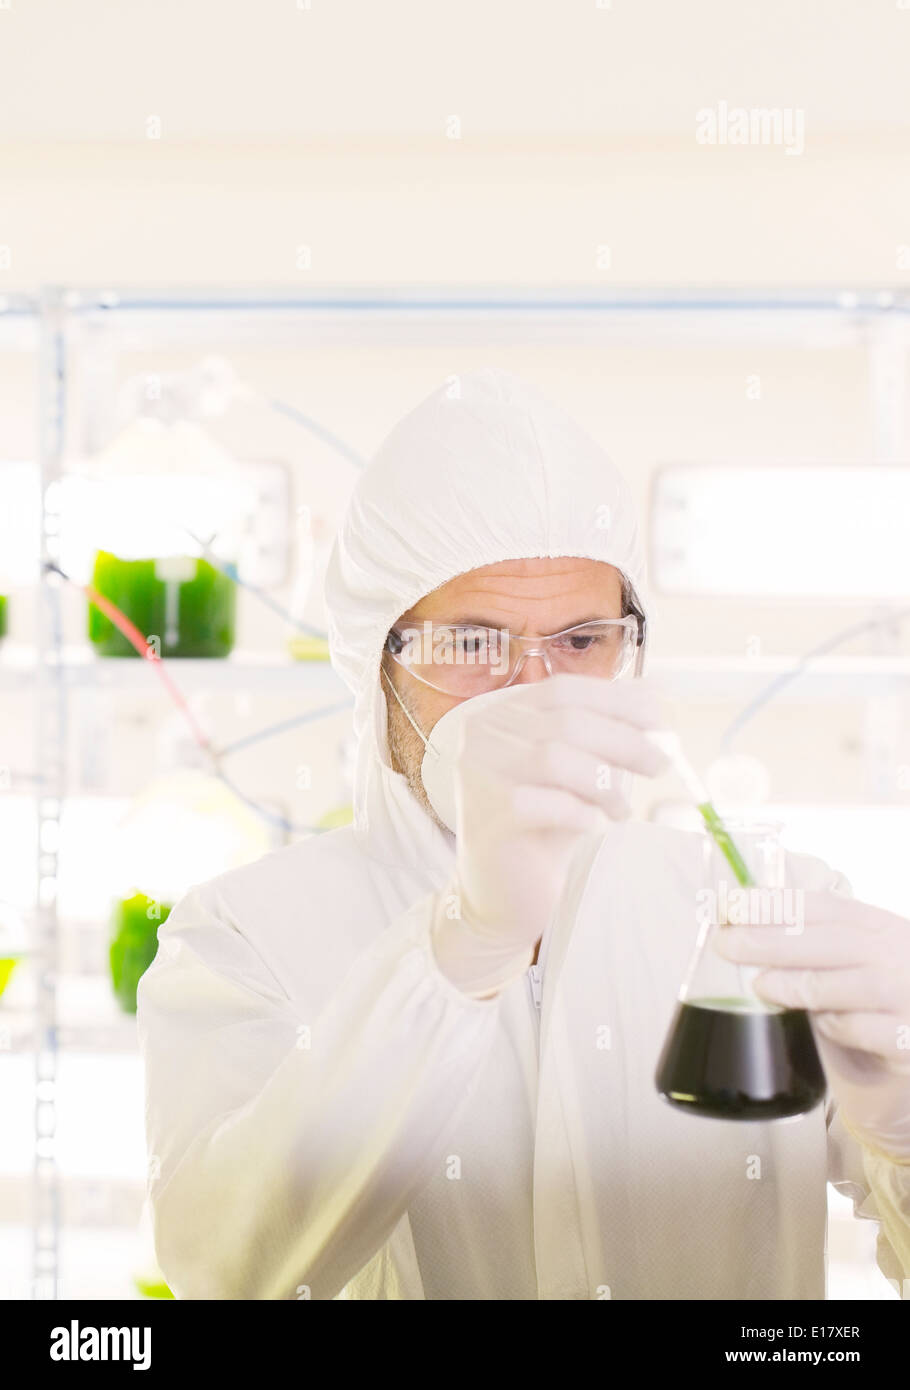 Scientist in clean suit with beaker in laboratory Stock Photo